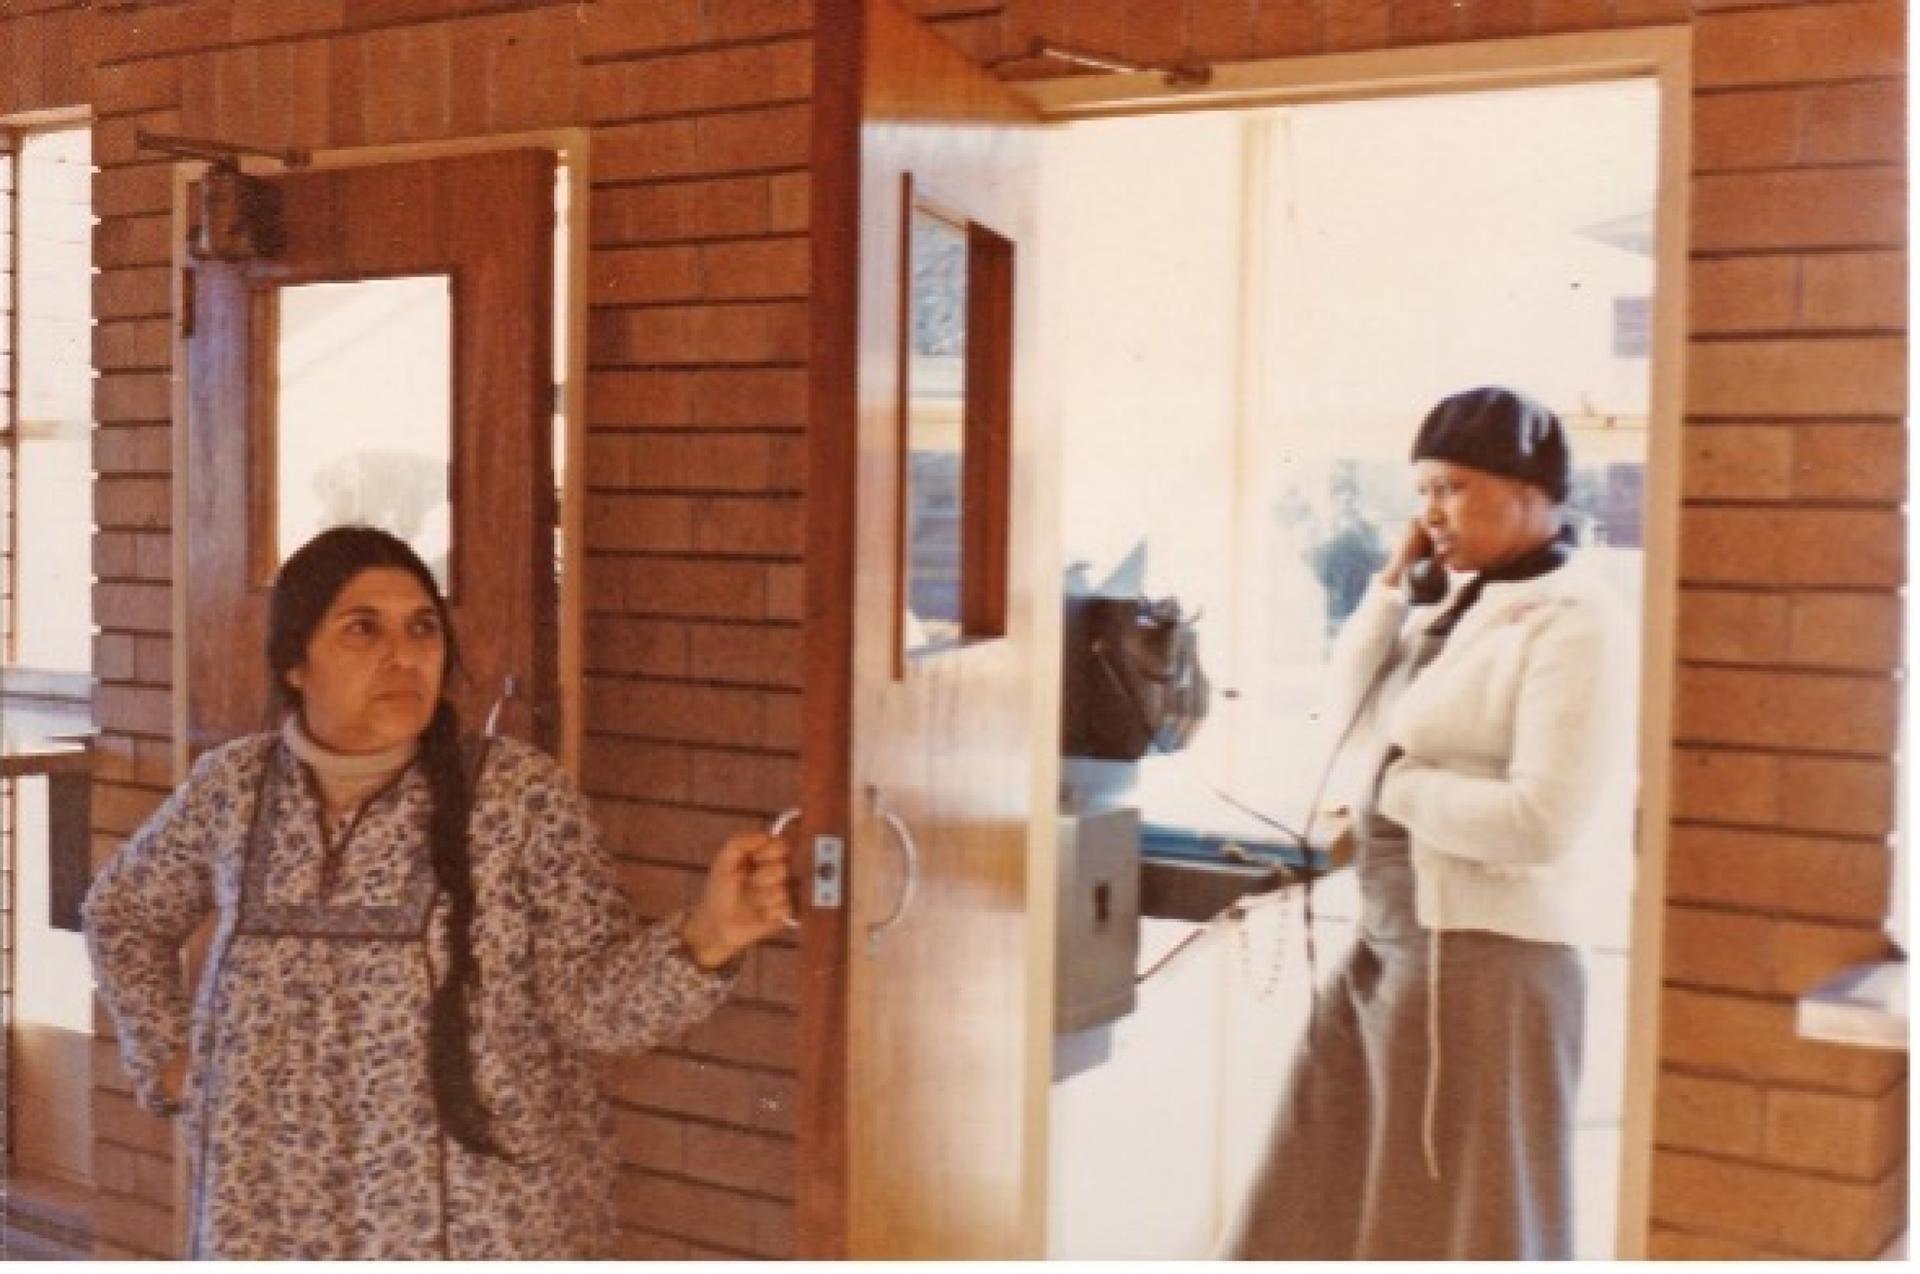 Winnie in Brandfort with Fatima Meer talking on the phone at a post office